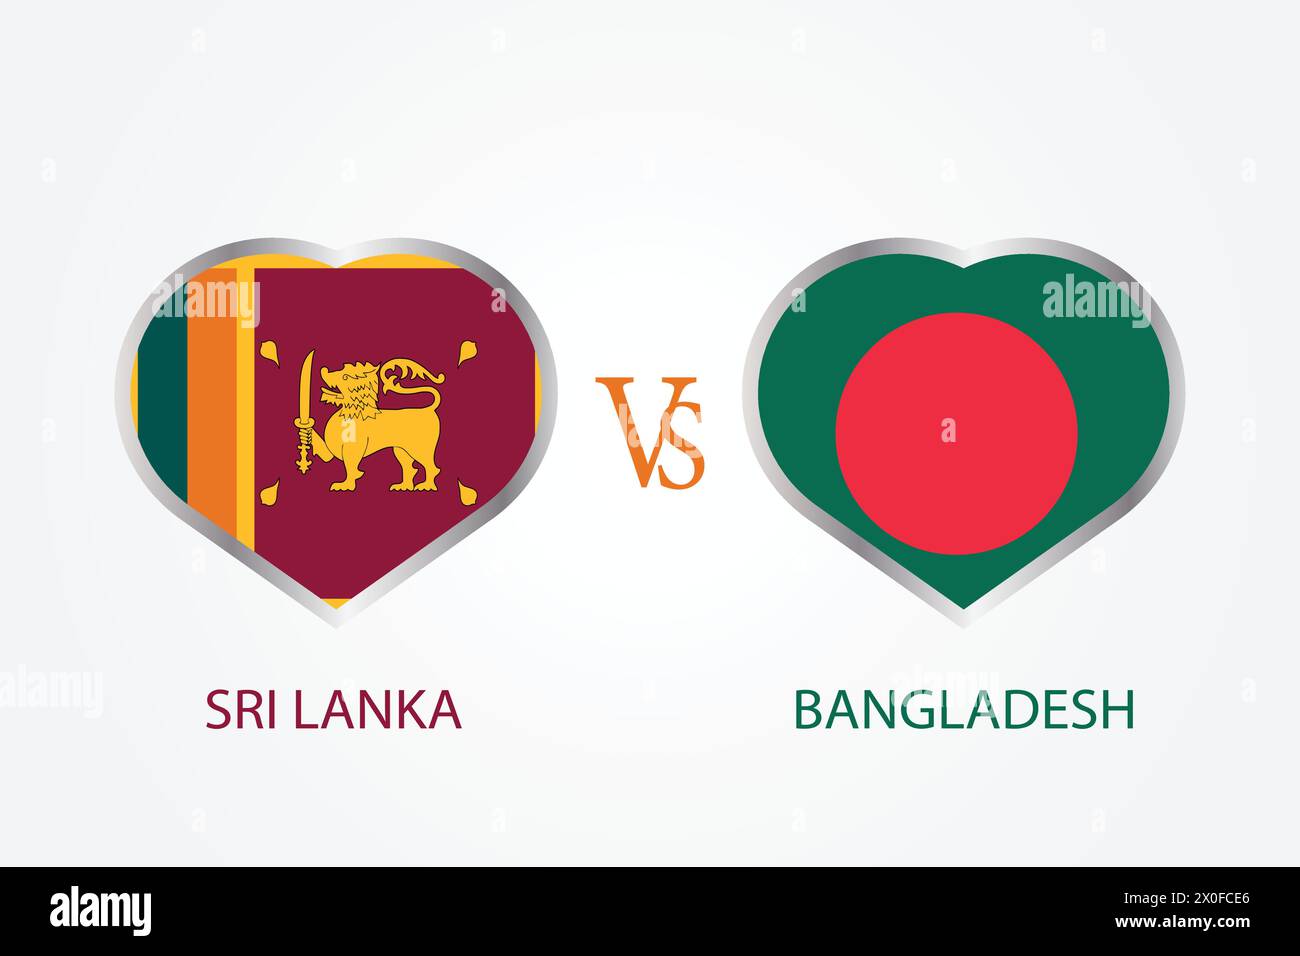 Sri Lanka Vs Bangladesh, Cricket Match concept with creative illustration of participant countries flag Batsman and Hearts isolated on white Stock Vector